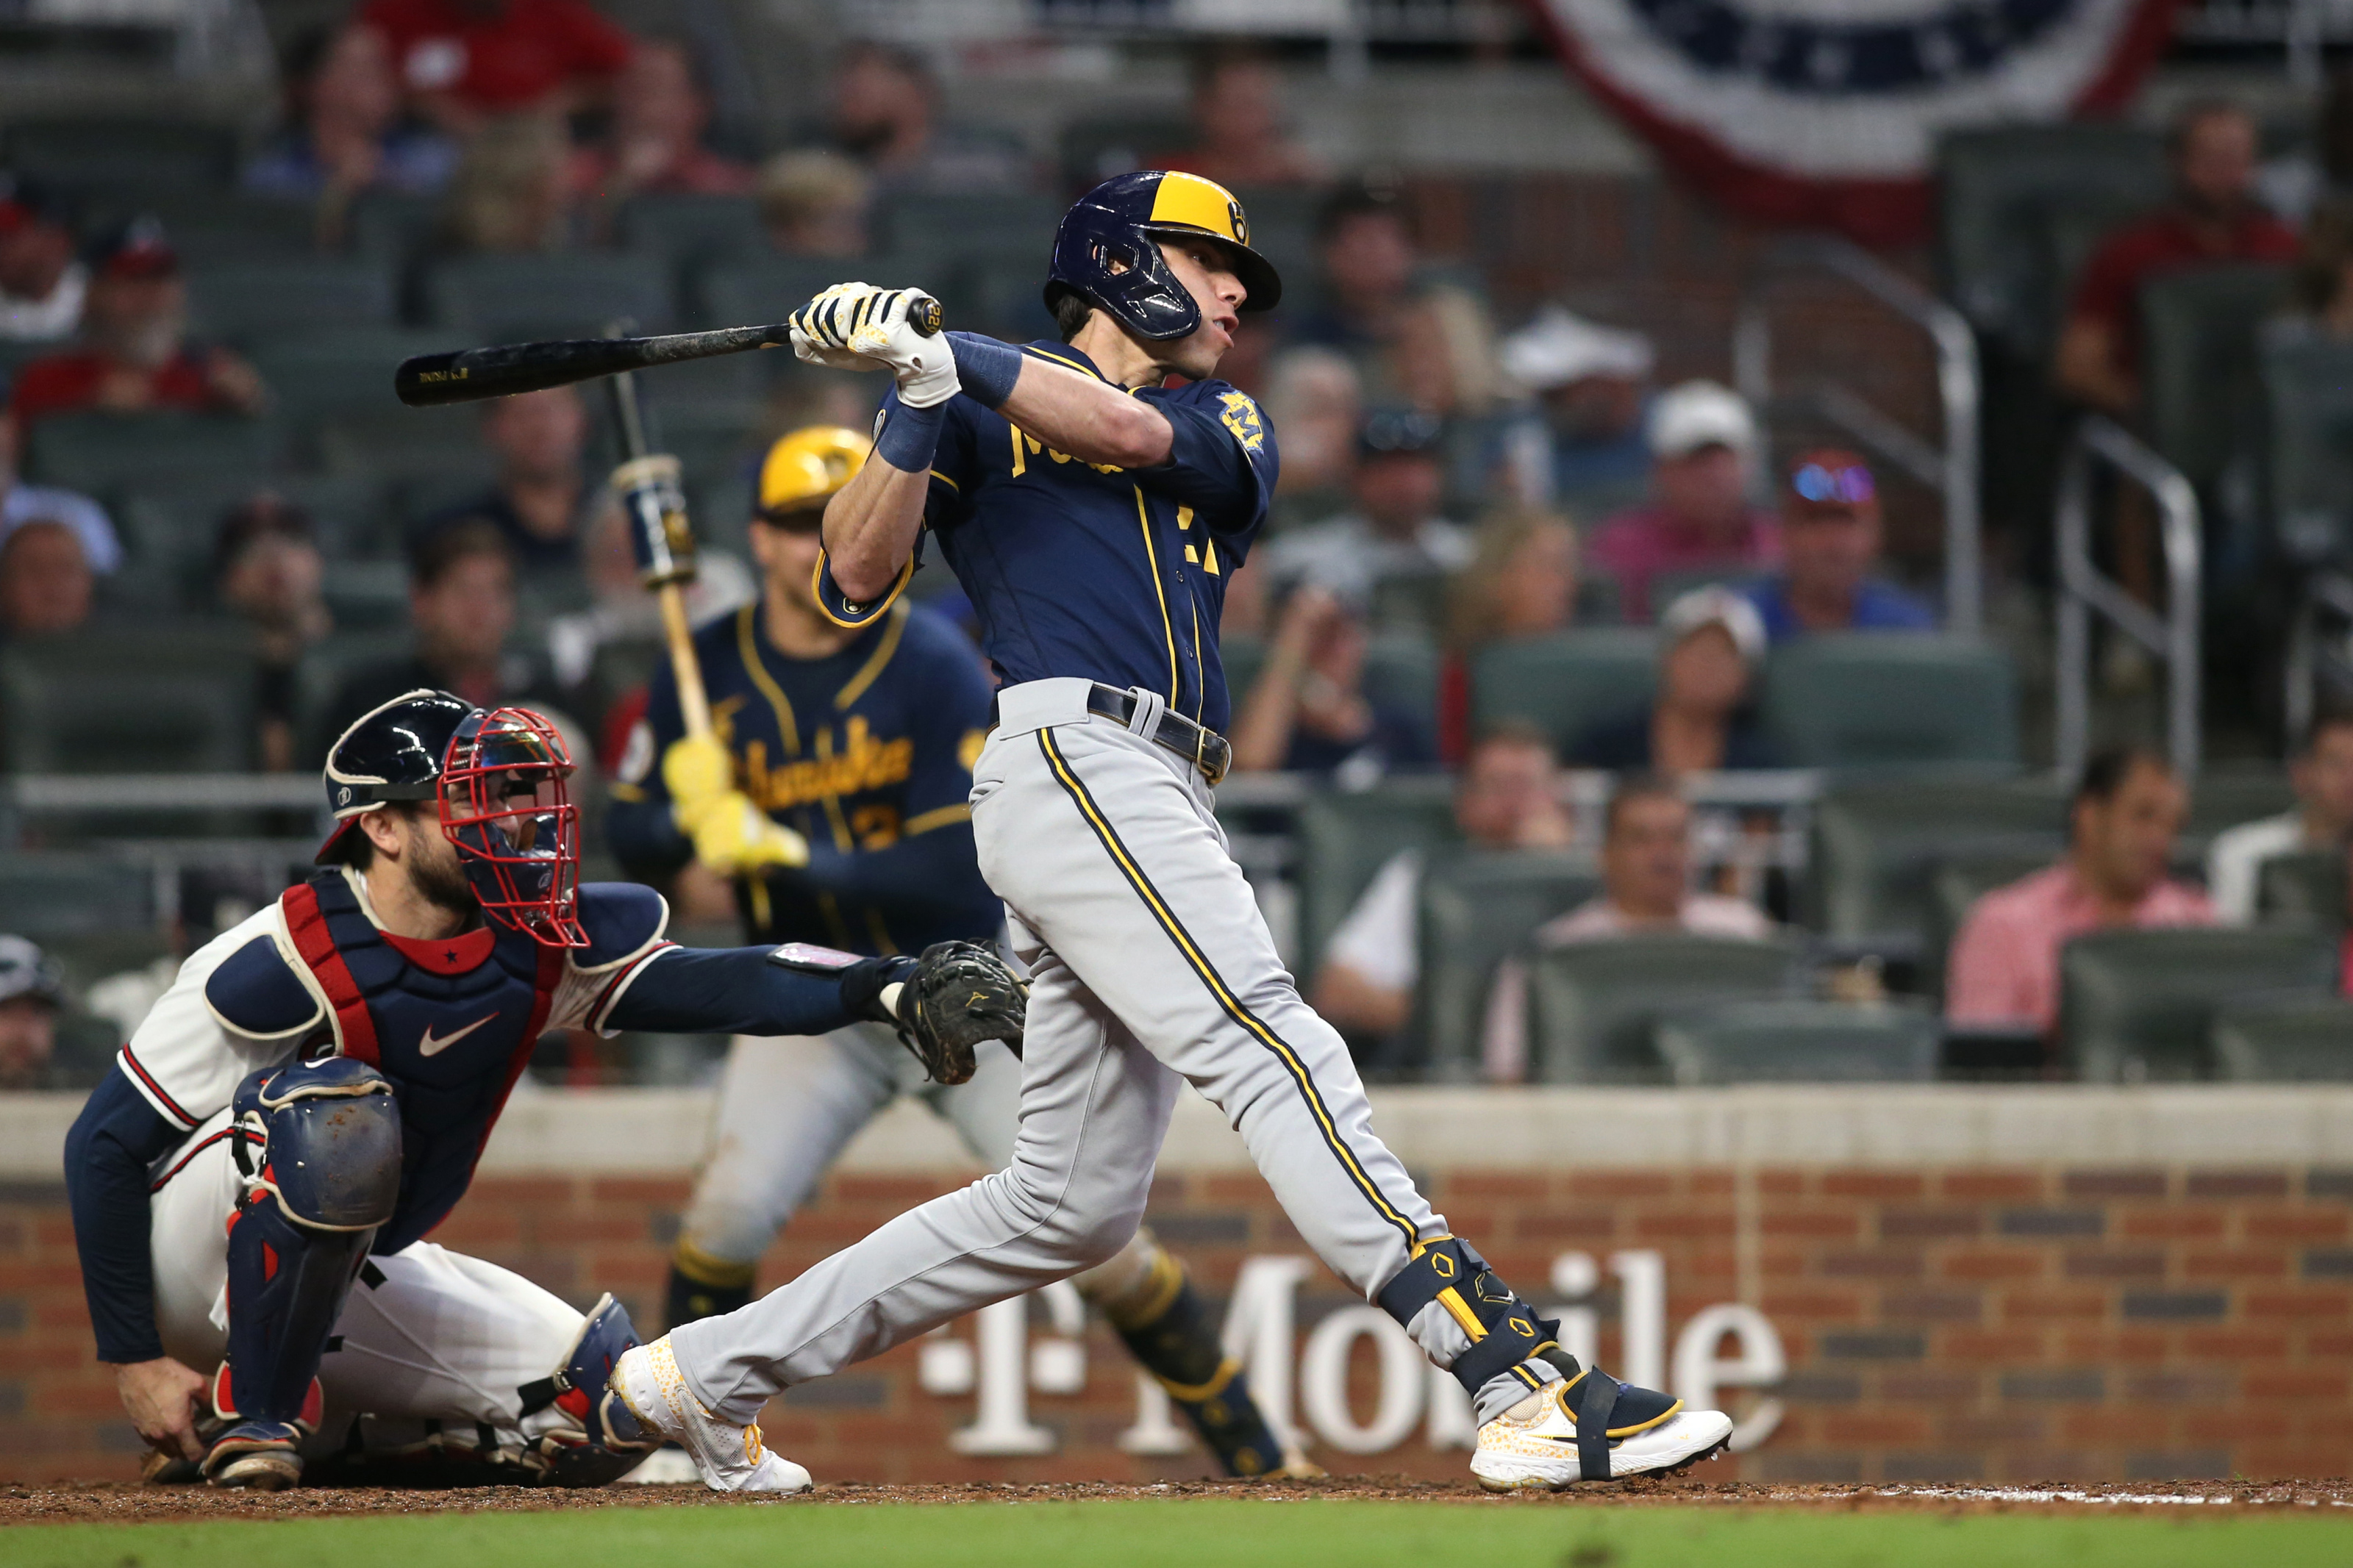 Brewers DH Jesse Winker will play less as he struggles on offense